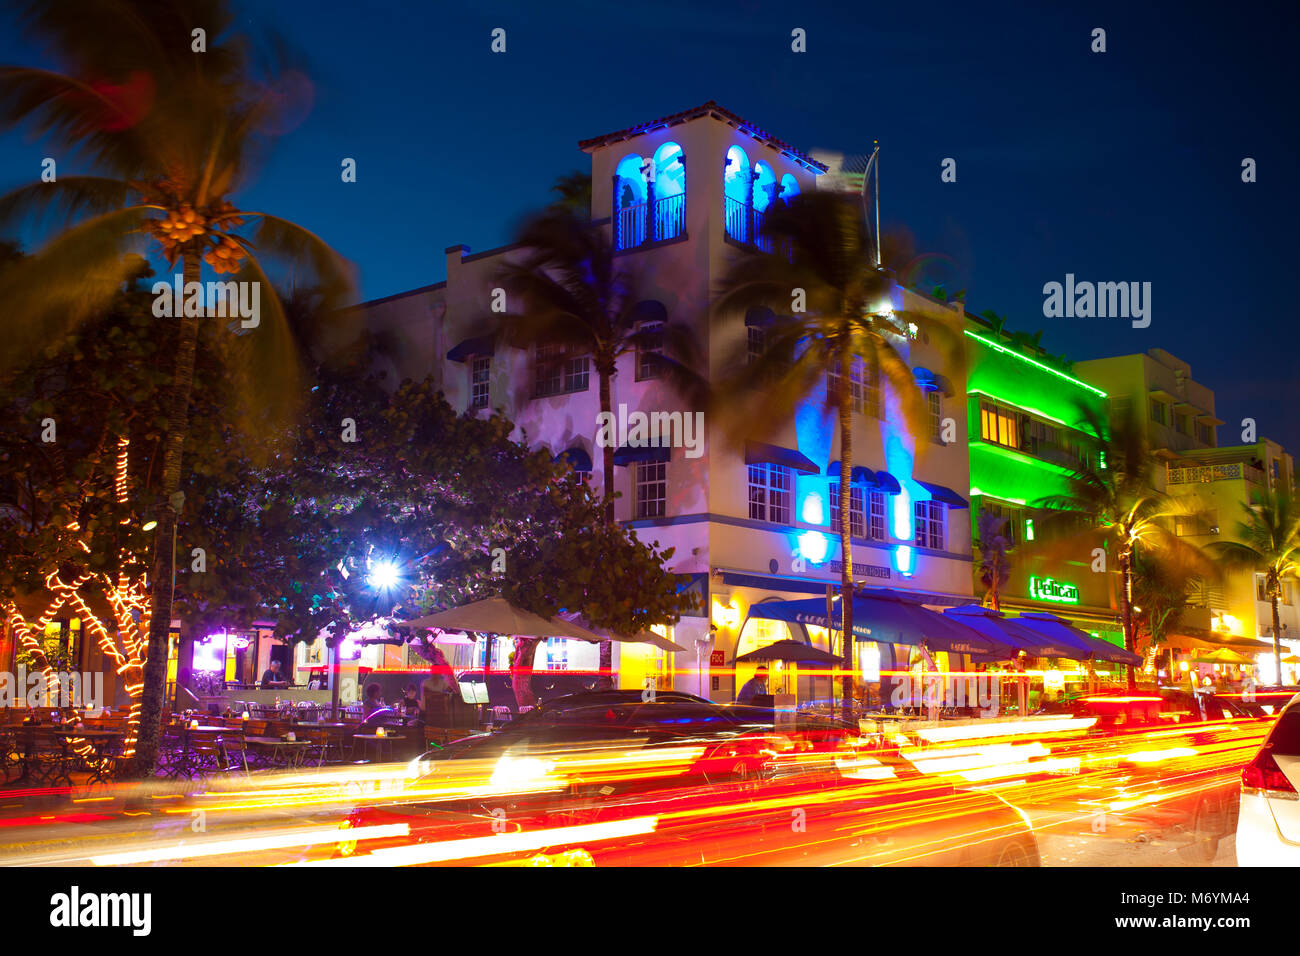 Ocean Drive in Miami at night with vibrant street colours. Cars passing by creating lines of light during long exposure. Palms, hotel in background. Stock Photo